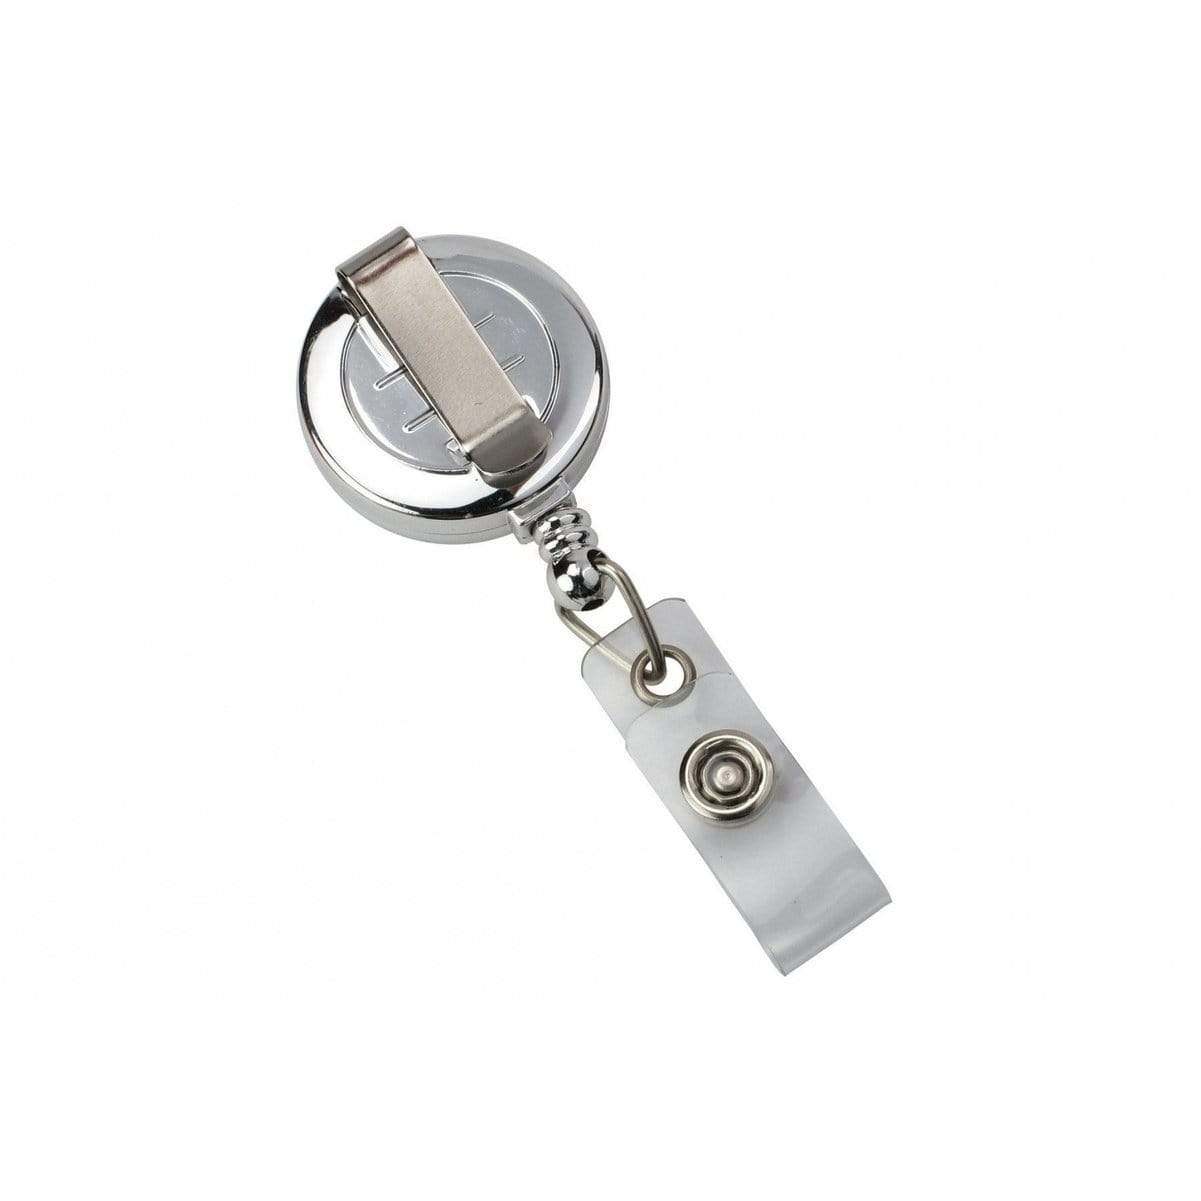 White Round Badge Reels with Silver Sticker & Belt Clip - Qty. 25 